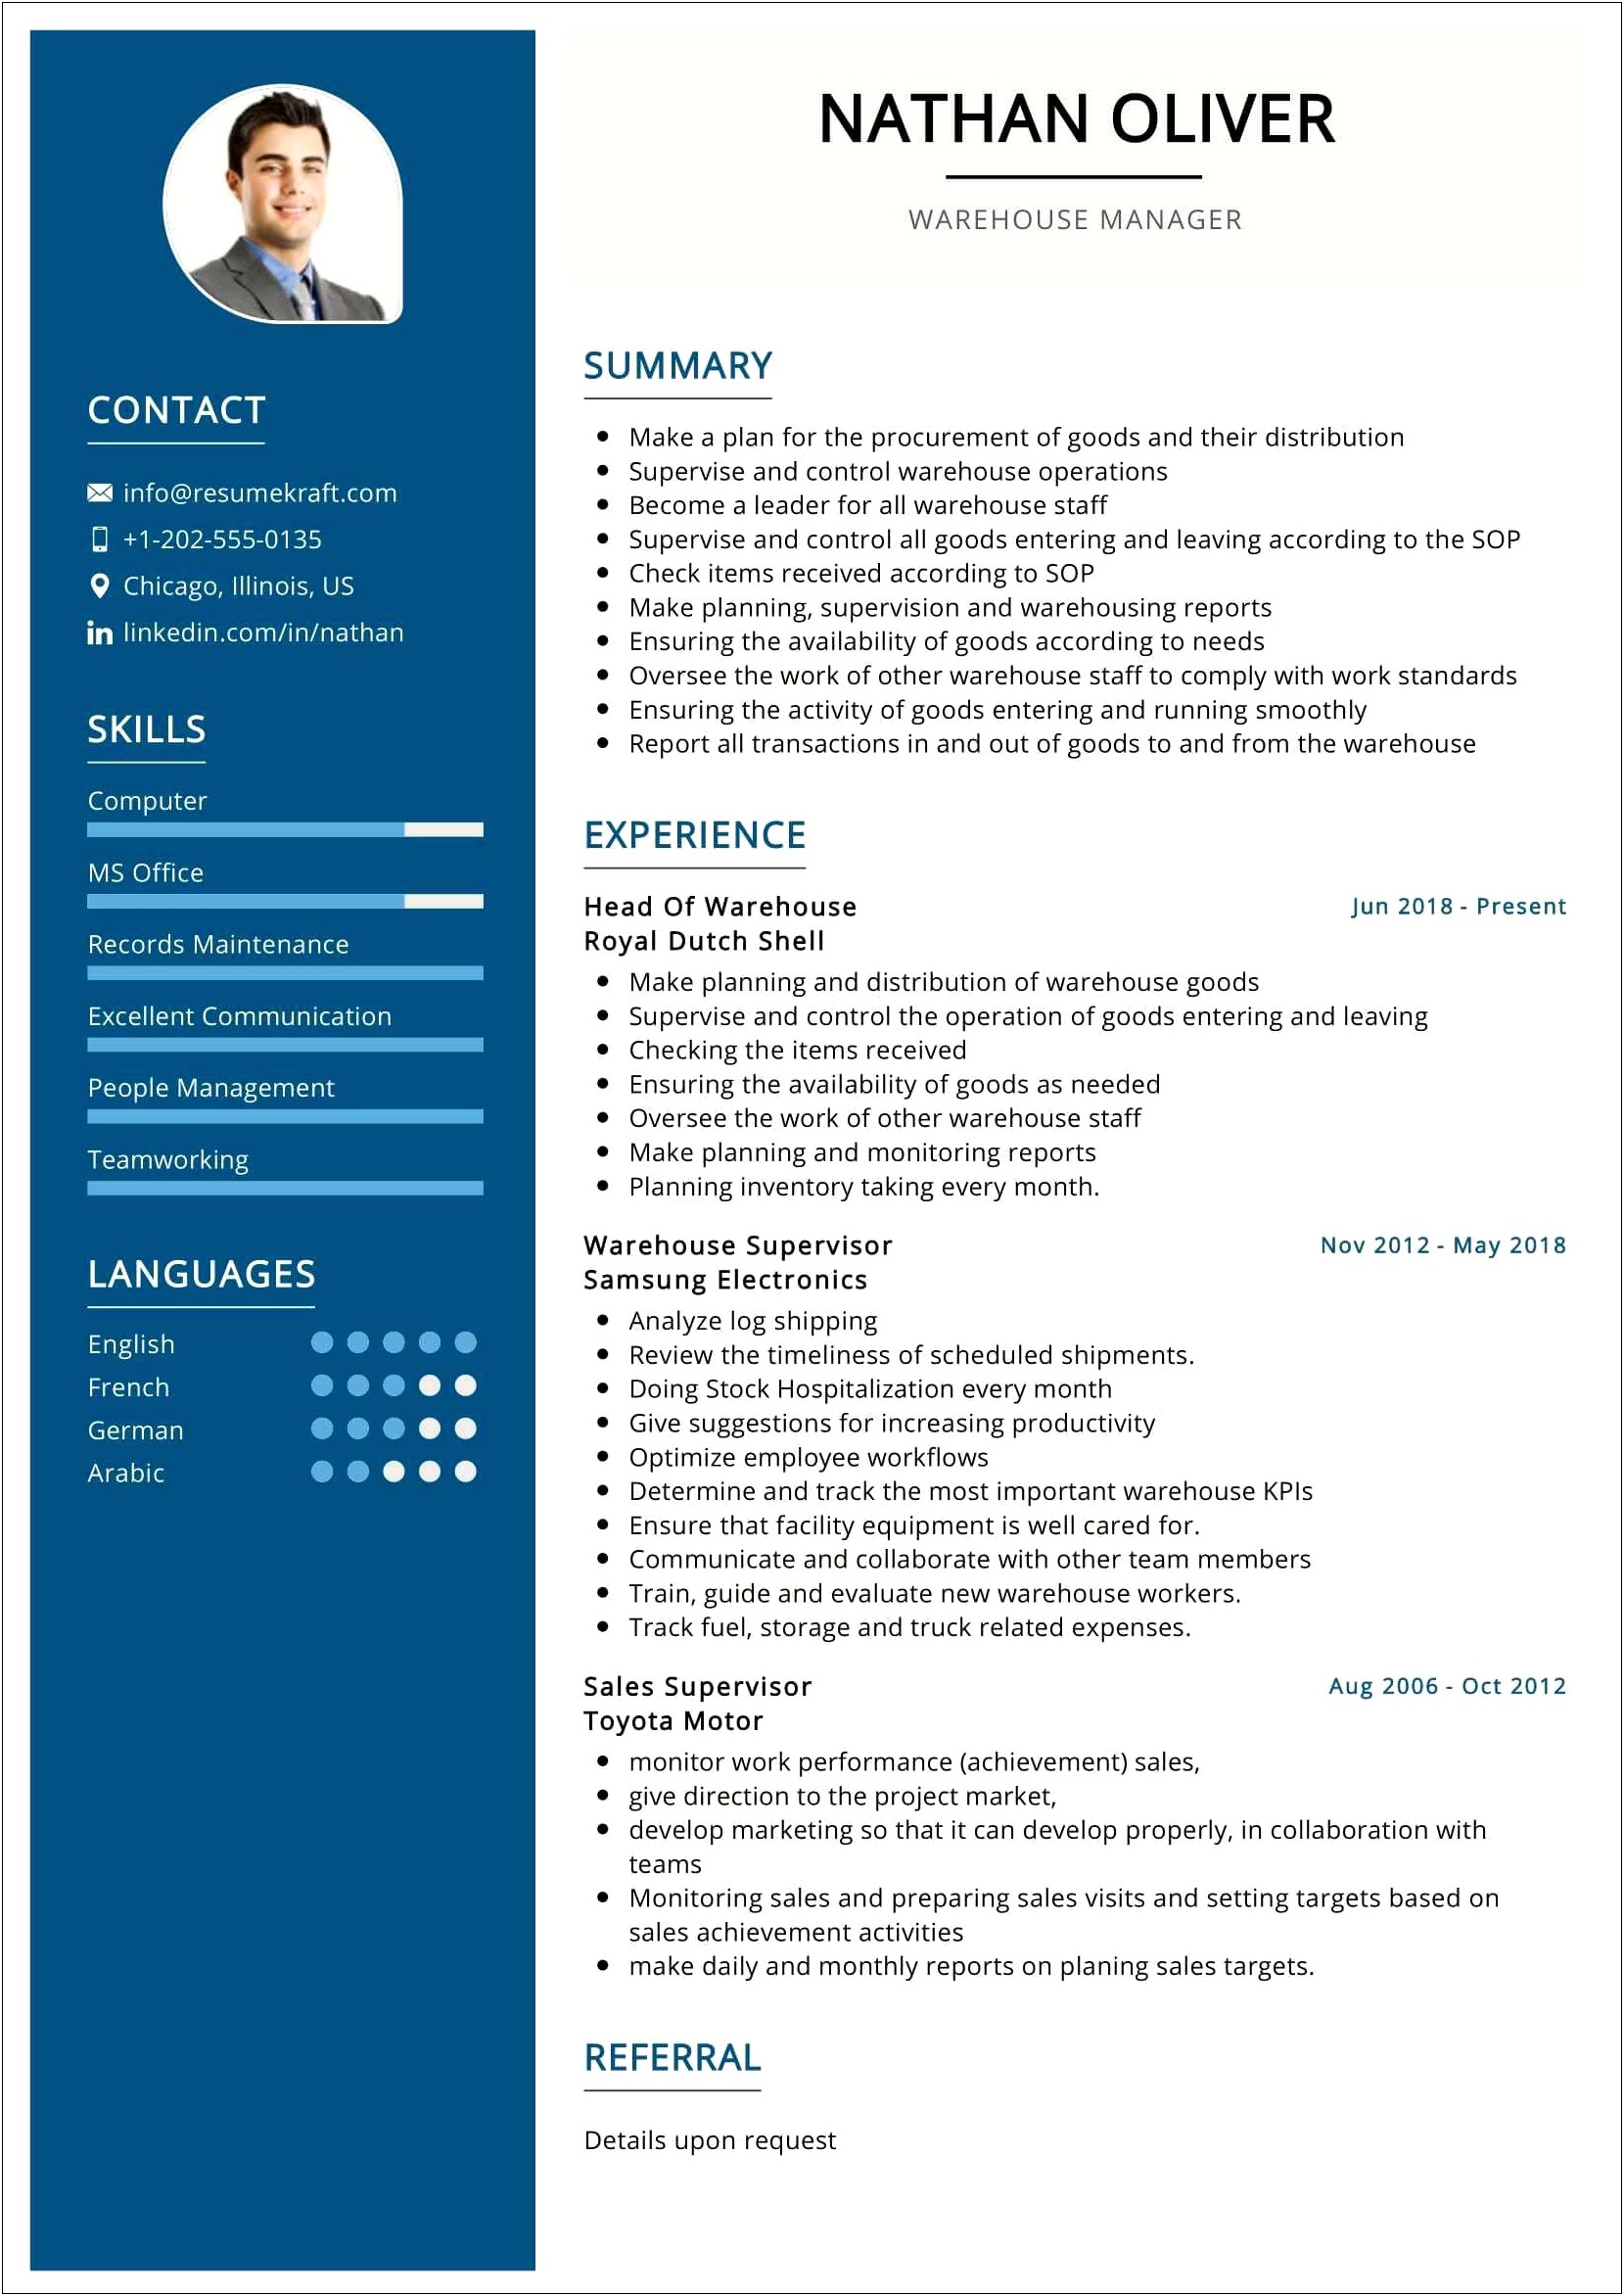 Writing A Summary For A Resume Warehouse